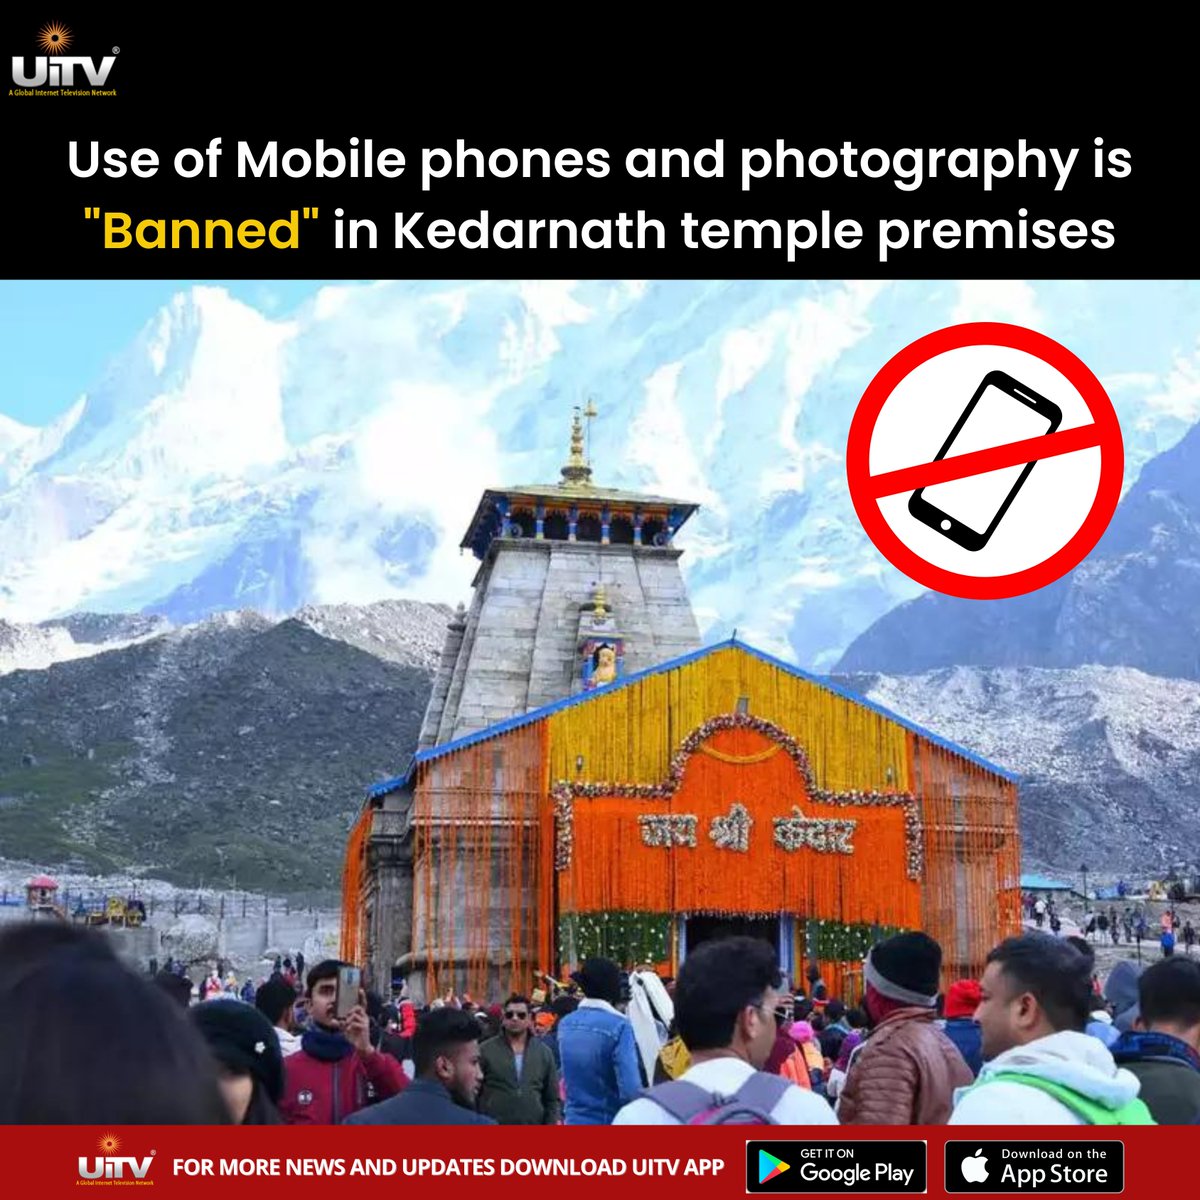 Devotees have been banned from taking photographs and making videos on the premises of the
Kedarnath temple
.
.
#Devotees #photography #VIDEOS #Kedarnath #KedarnathDham #KedarnathTemple #phoneban #Reels #LatestNews #dailynews